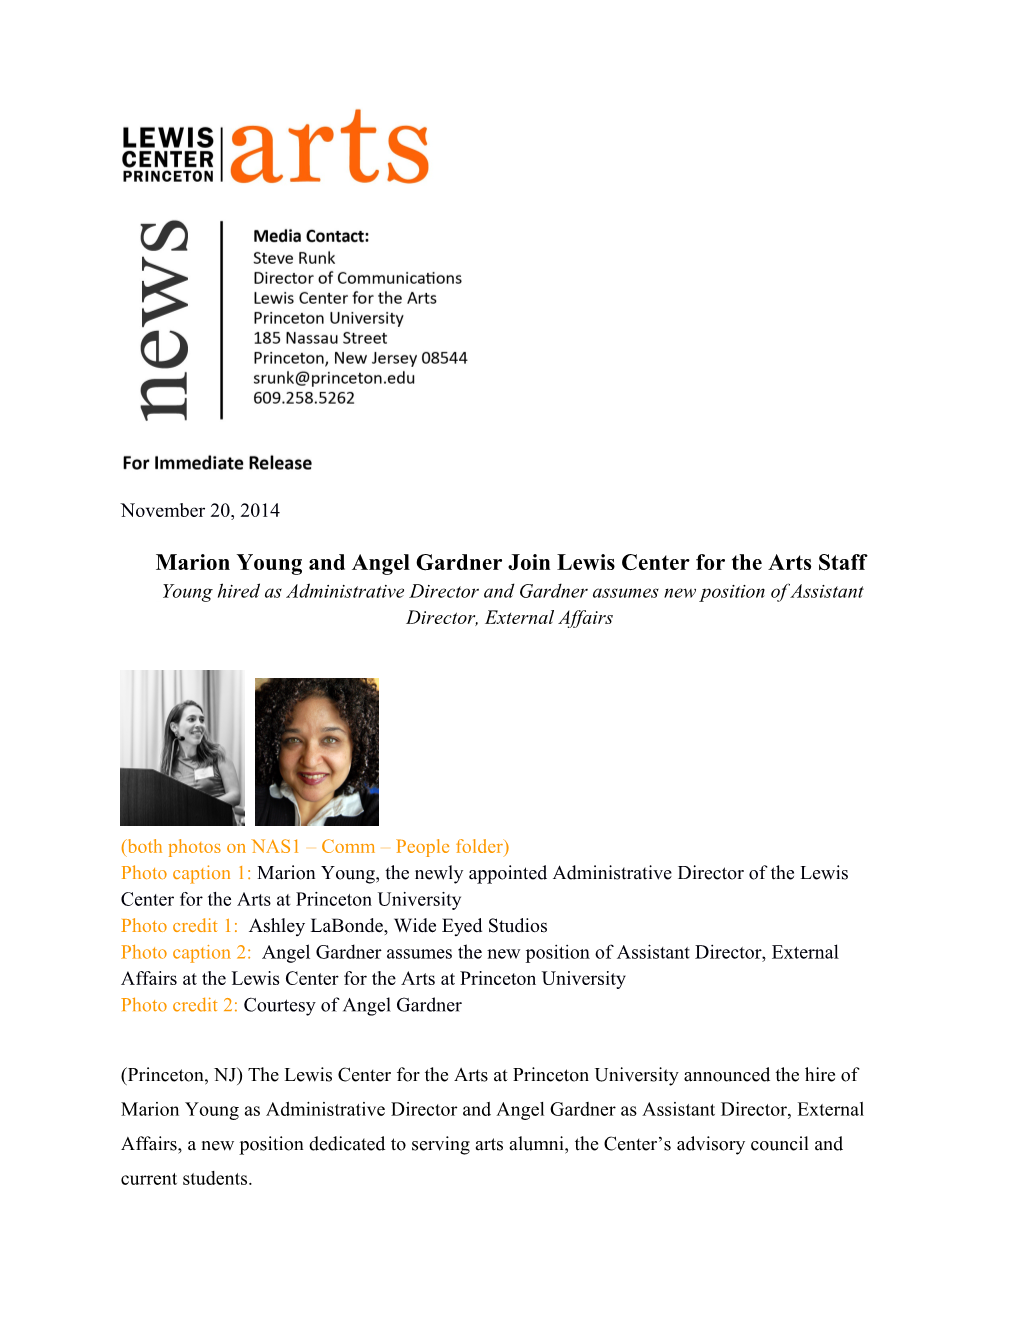 Marion Young and Angel Gardner Join Lewis Center for the Arts Staff